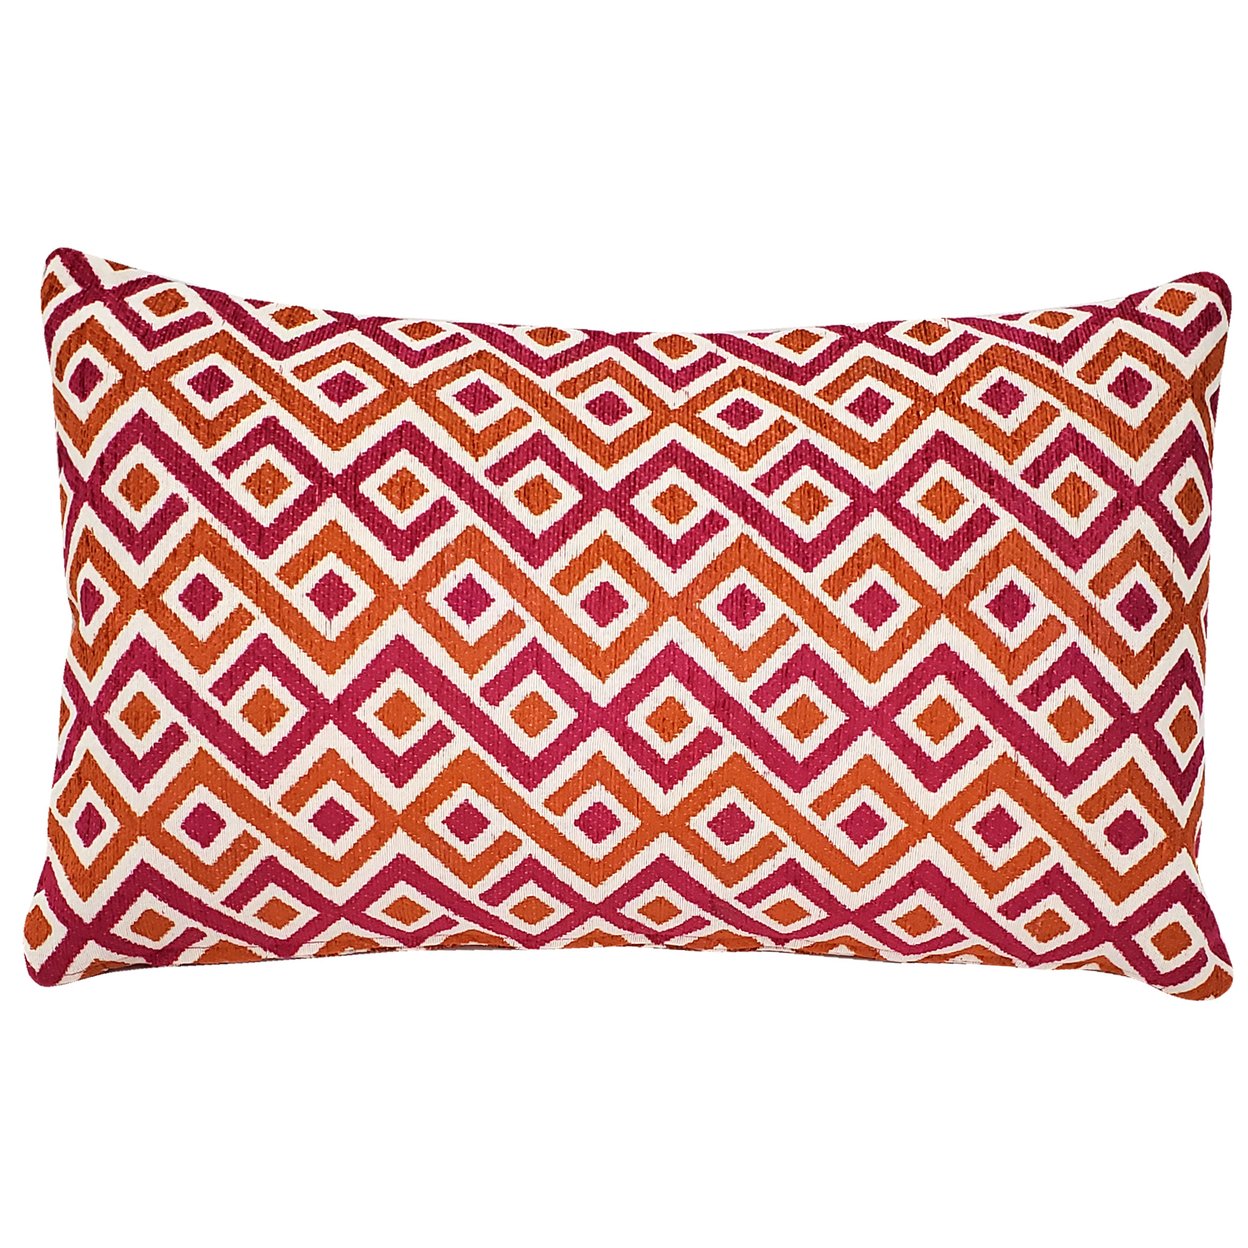 Follow Me Fiesta Pink And Orange Throw Pillow 12x19, With Polyfill Insert